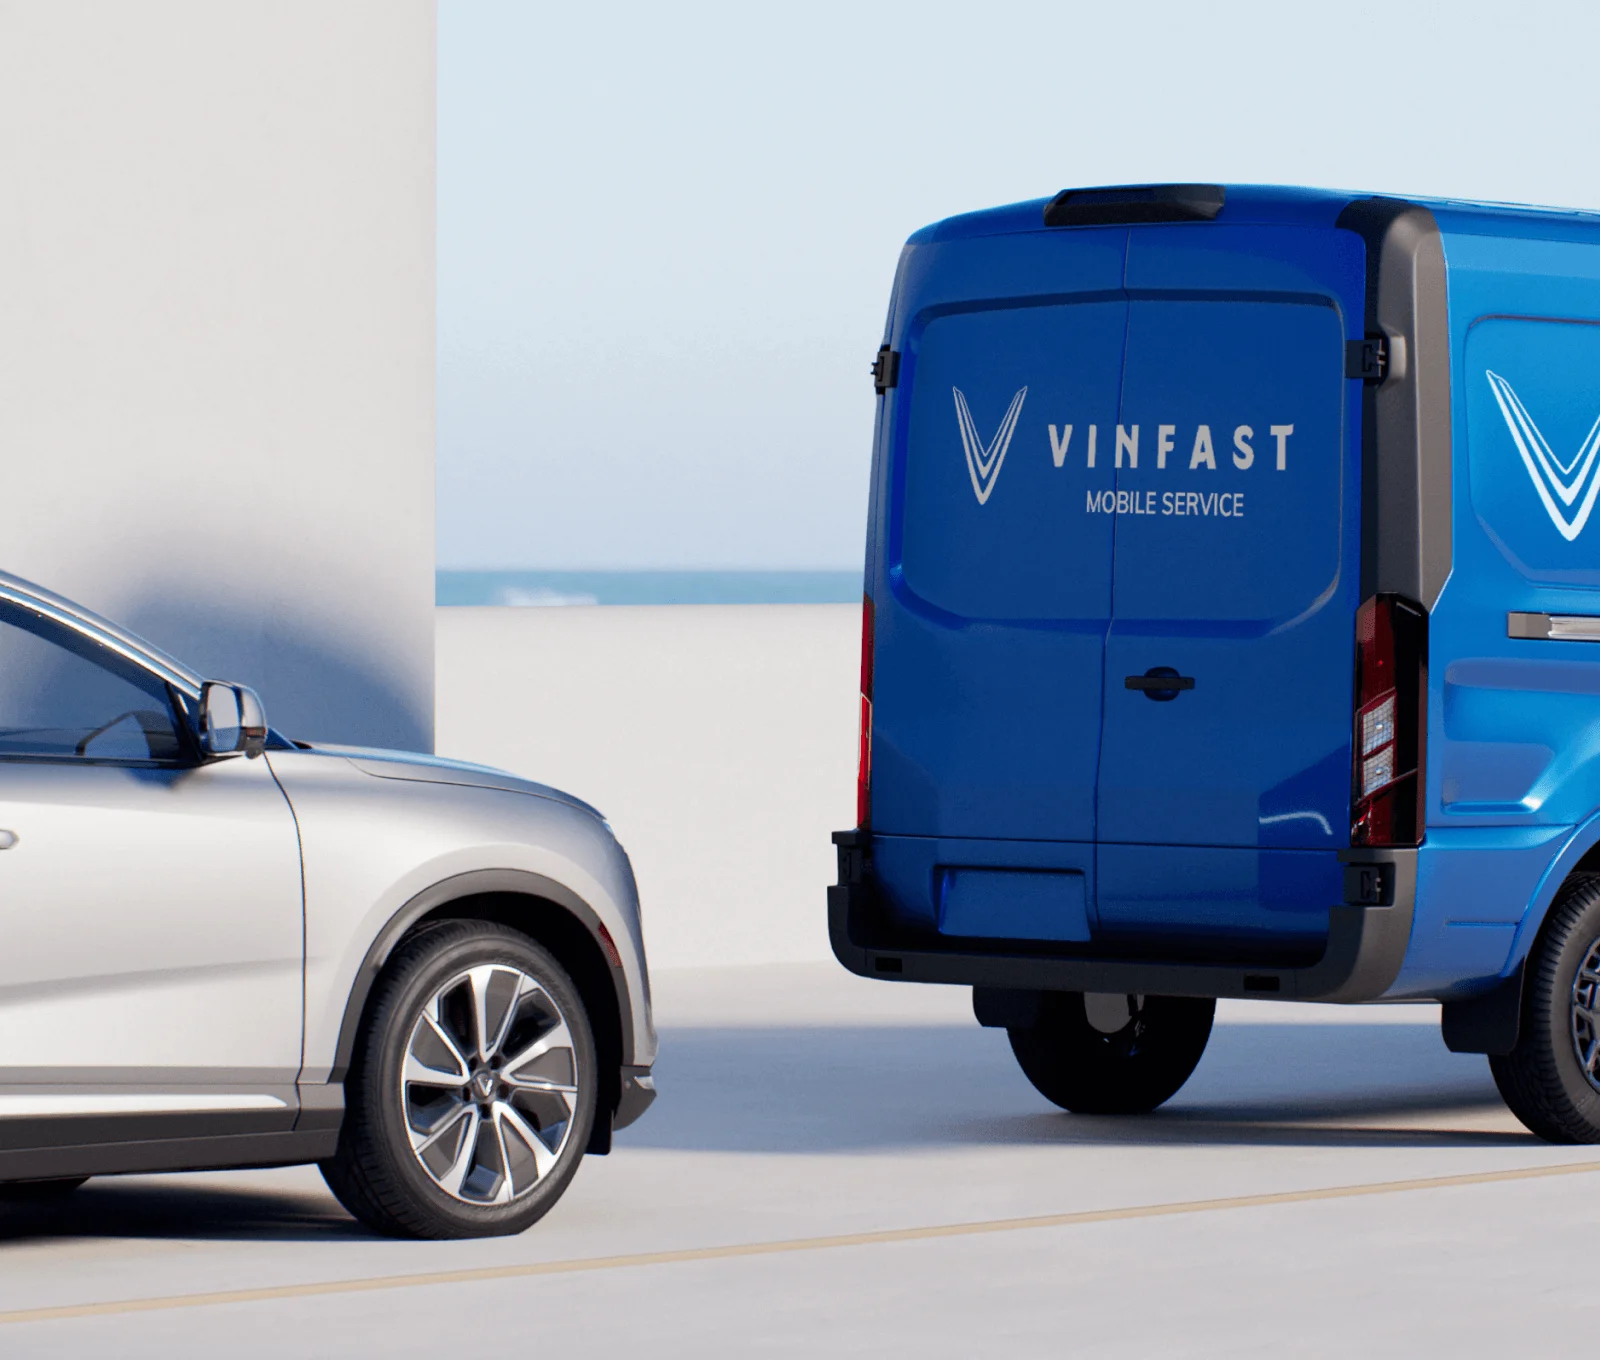 Silver VinFast car and the mobile service van driving on the road to promote the VinFast warranty